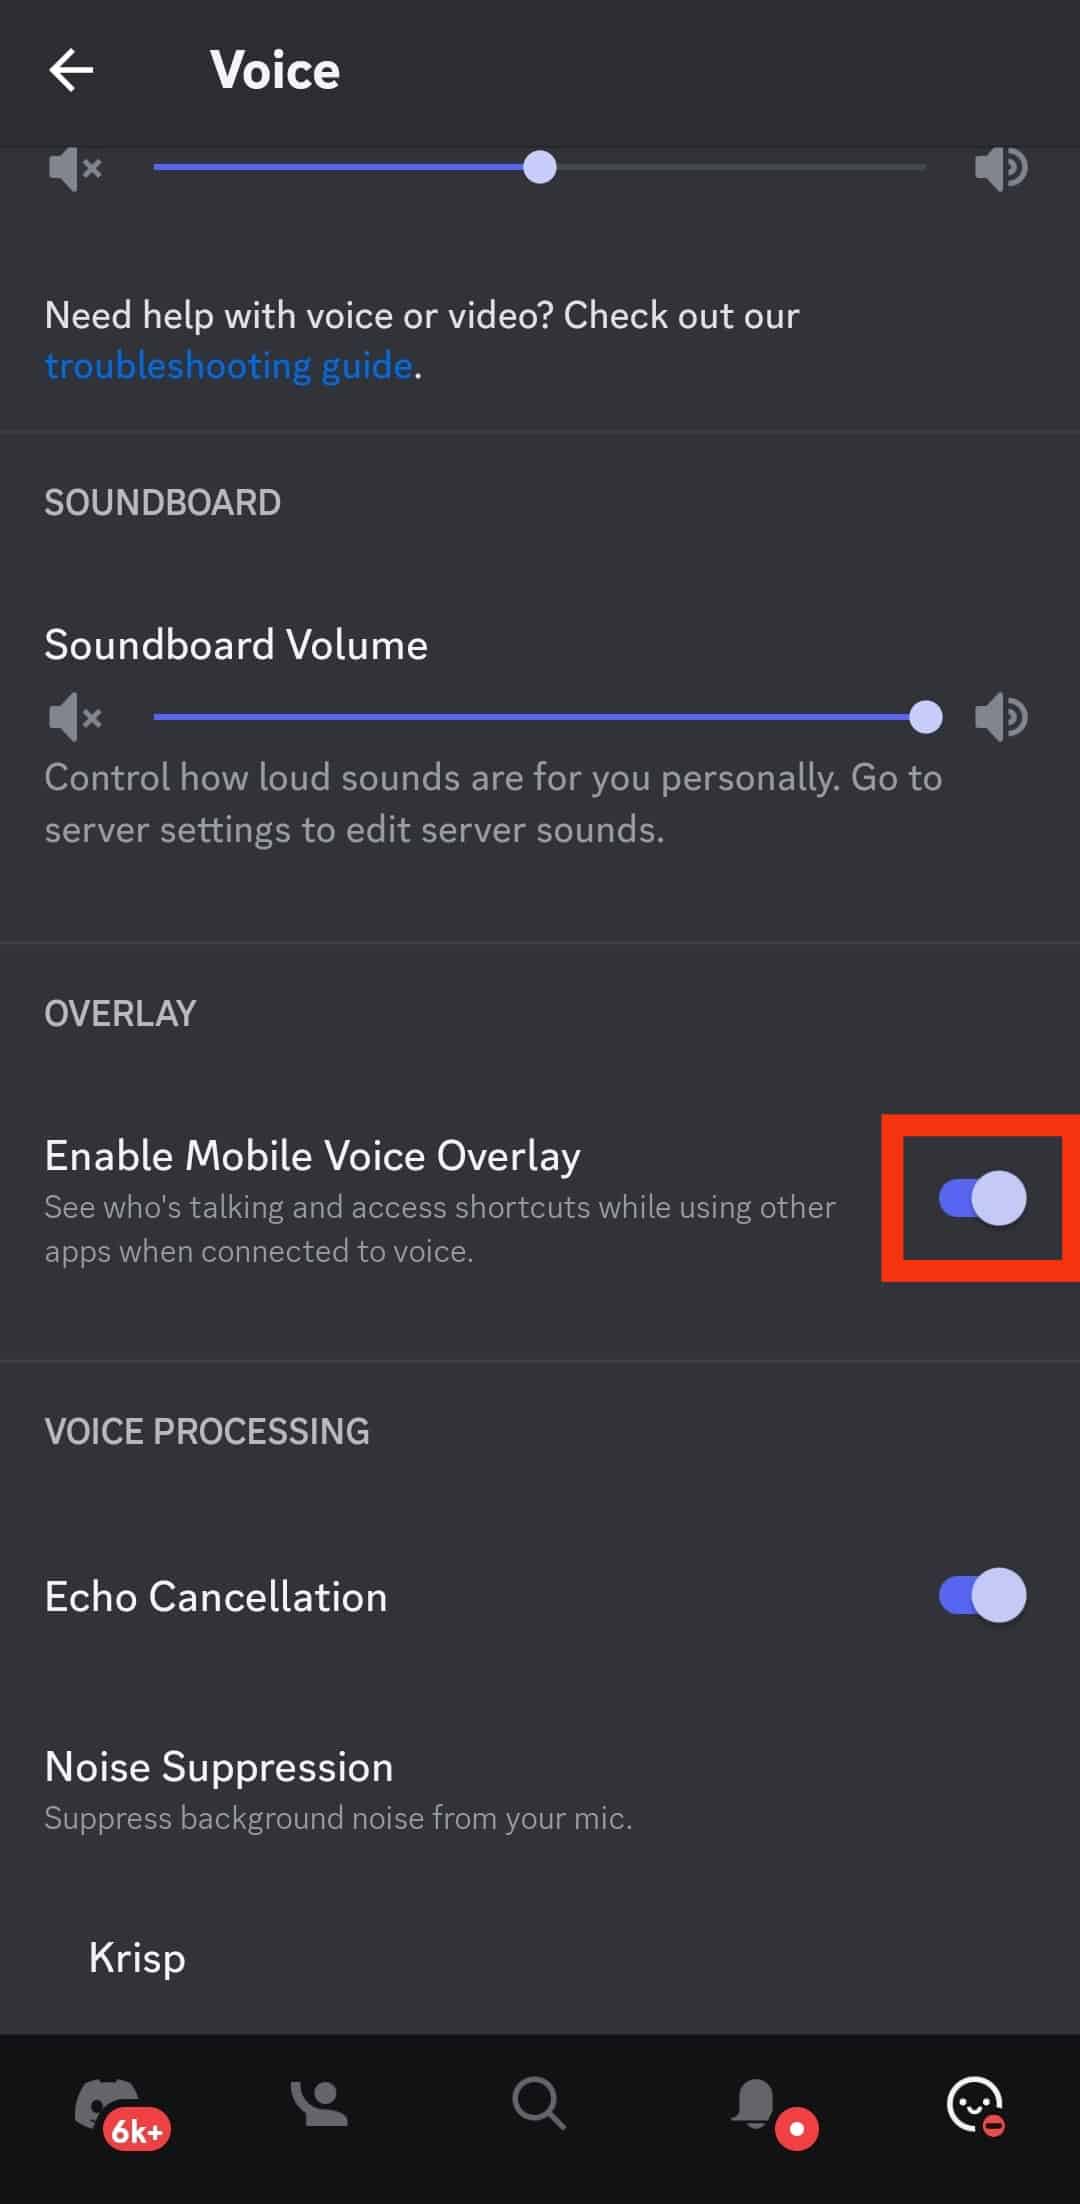 Enable Mobile Voice Overlay